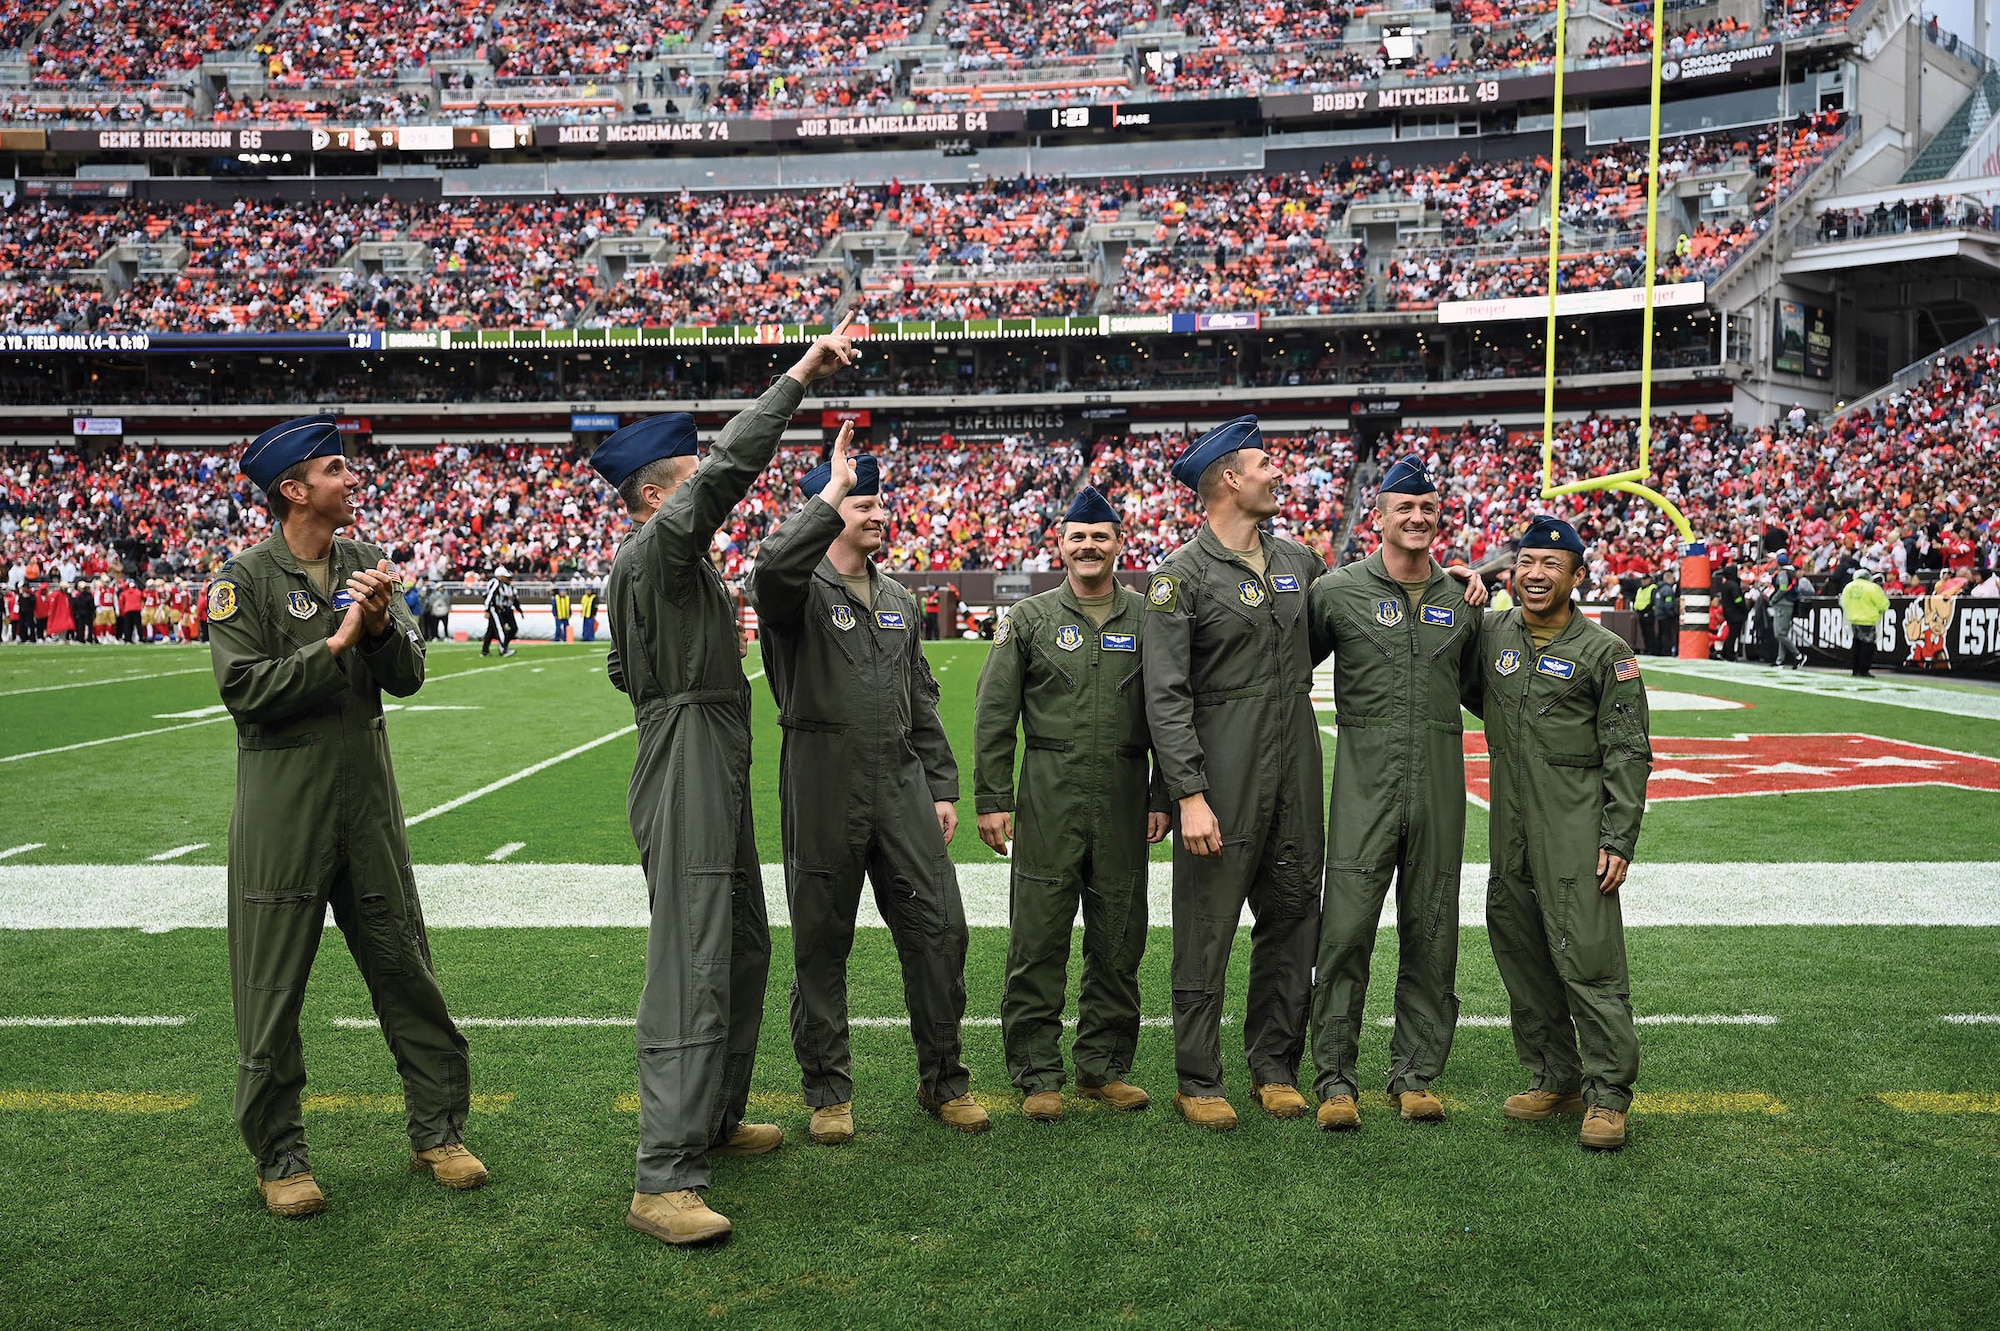 Airmen with the 89th Airlift Squadron take to the field at the Cleveland Browns Stadium, Ohio, after a flyover Oct. 15, 2023. Flyovers provide another avenue for crews to train aboard the C-17 Globemaster III aircraft, honing their skills and showcasing the aircraft’s capabilities to millions across the country. (U.S. Air Force photo/Master Sgt. Patrick O’Reilly)